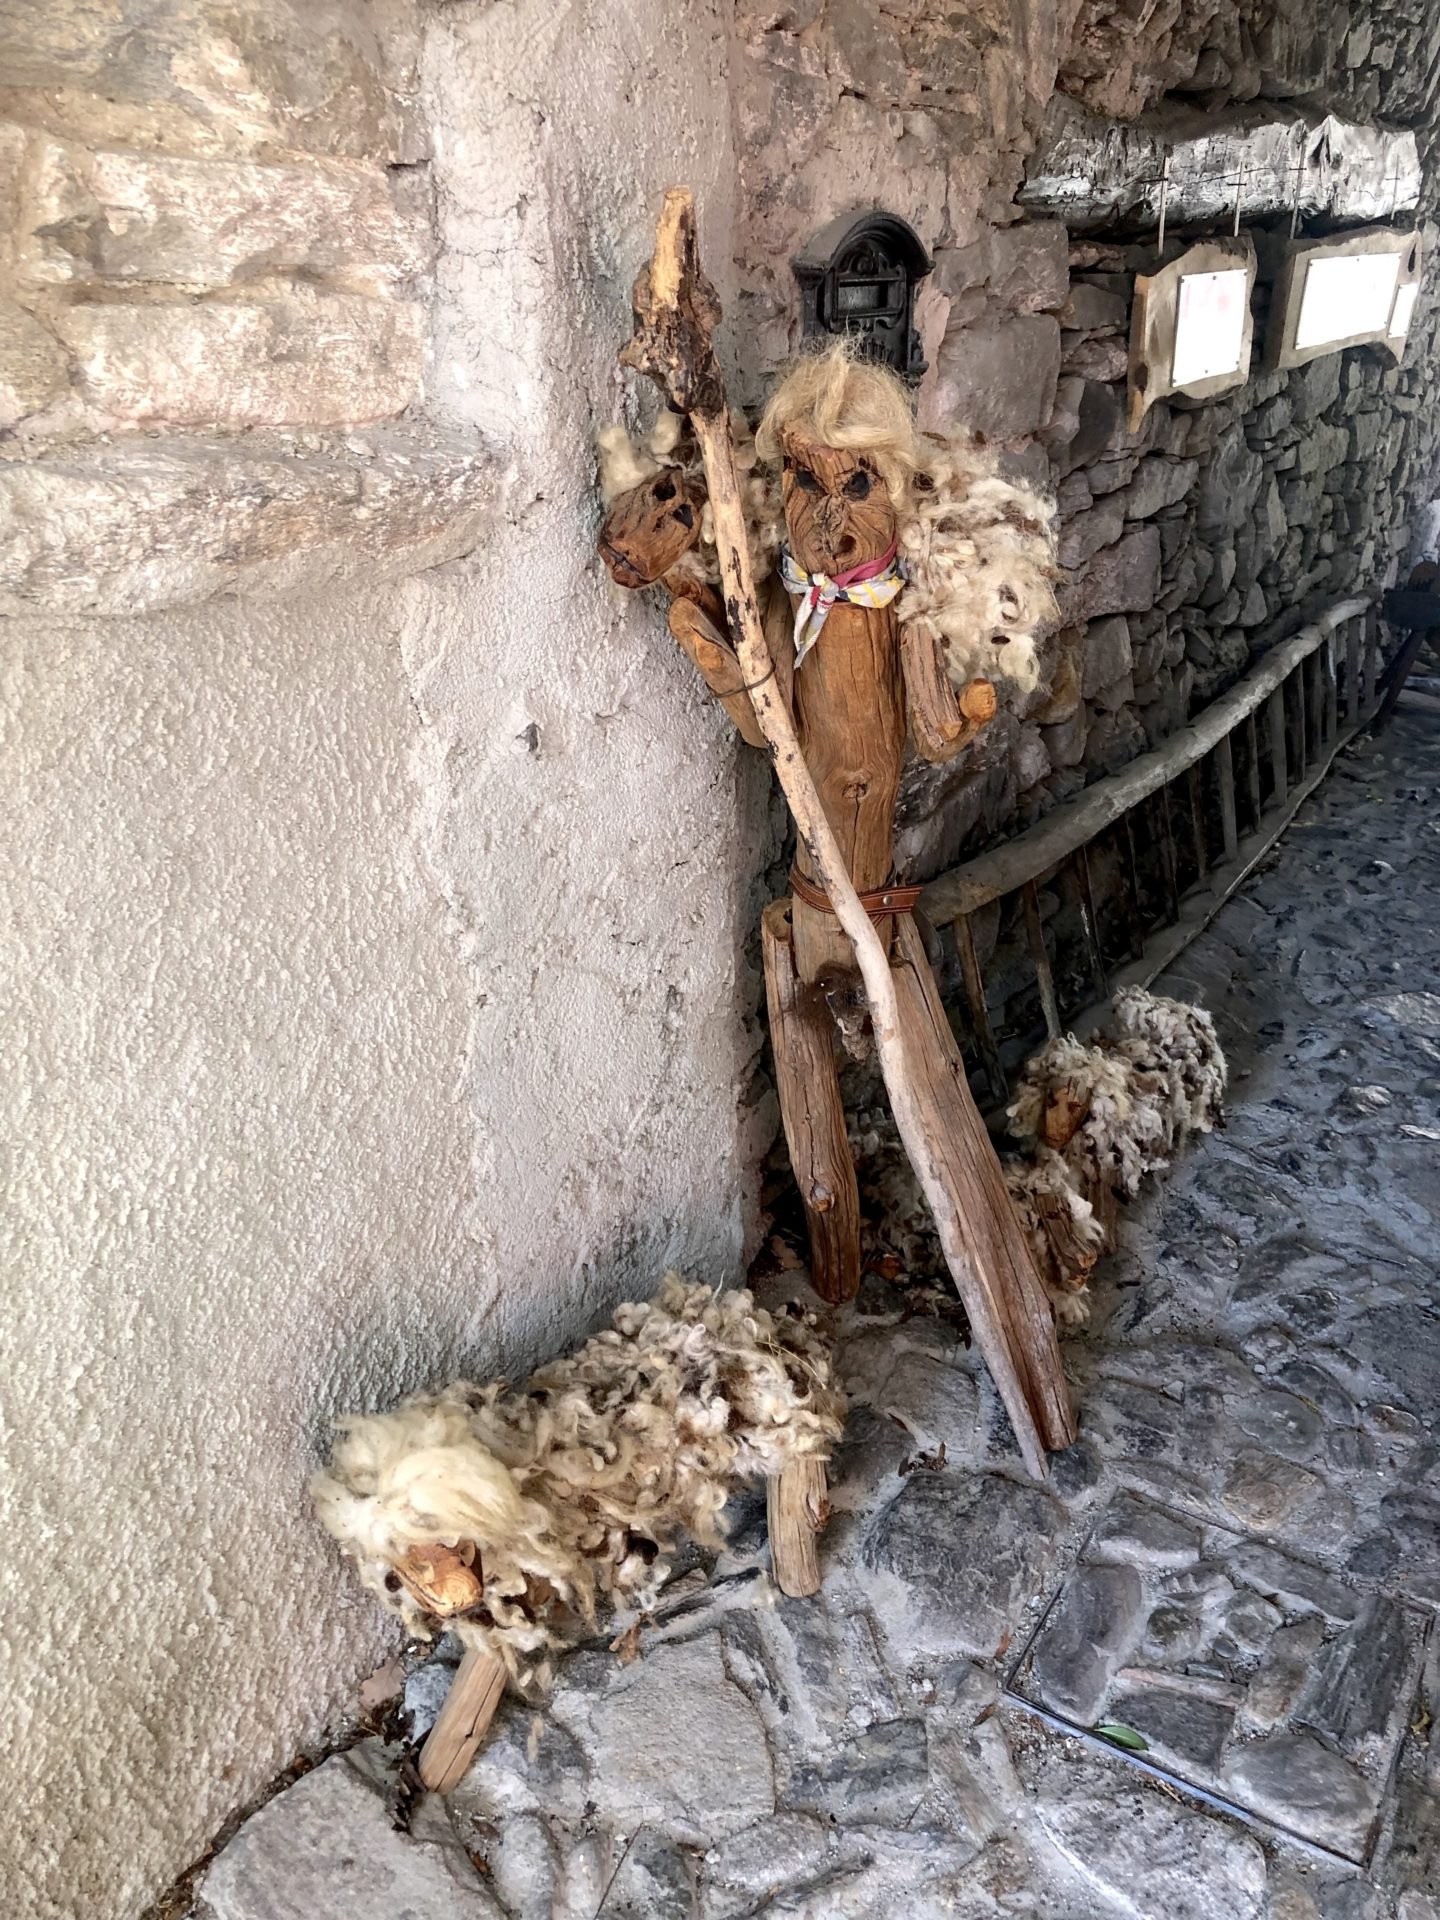 A shepard and sheep made out of wood in the town of Musignano, Lake Maggiore